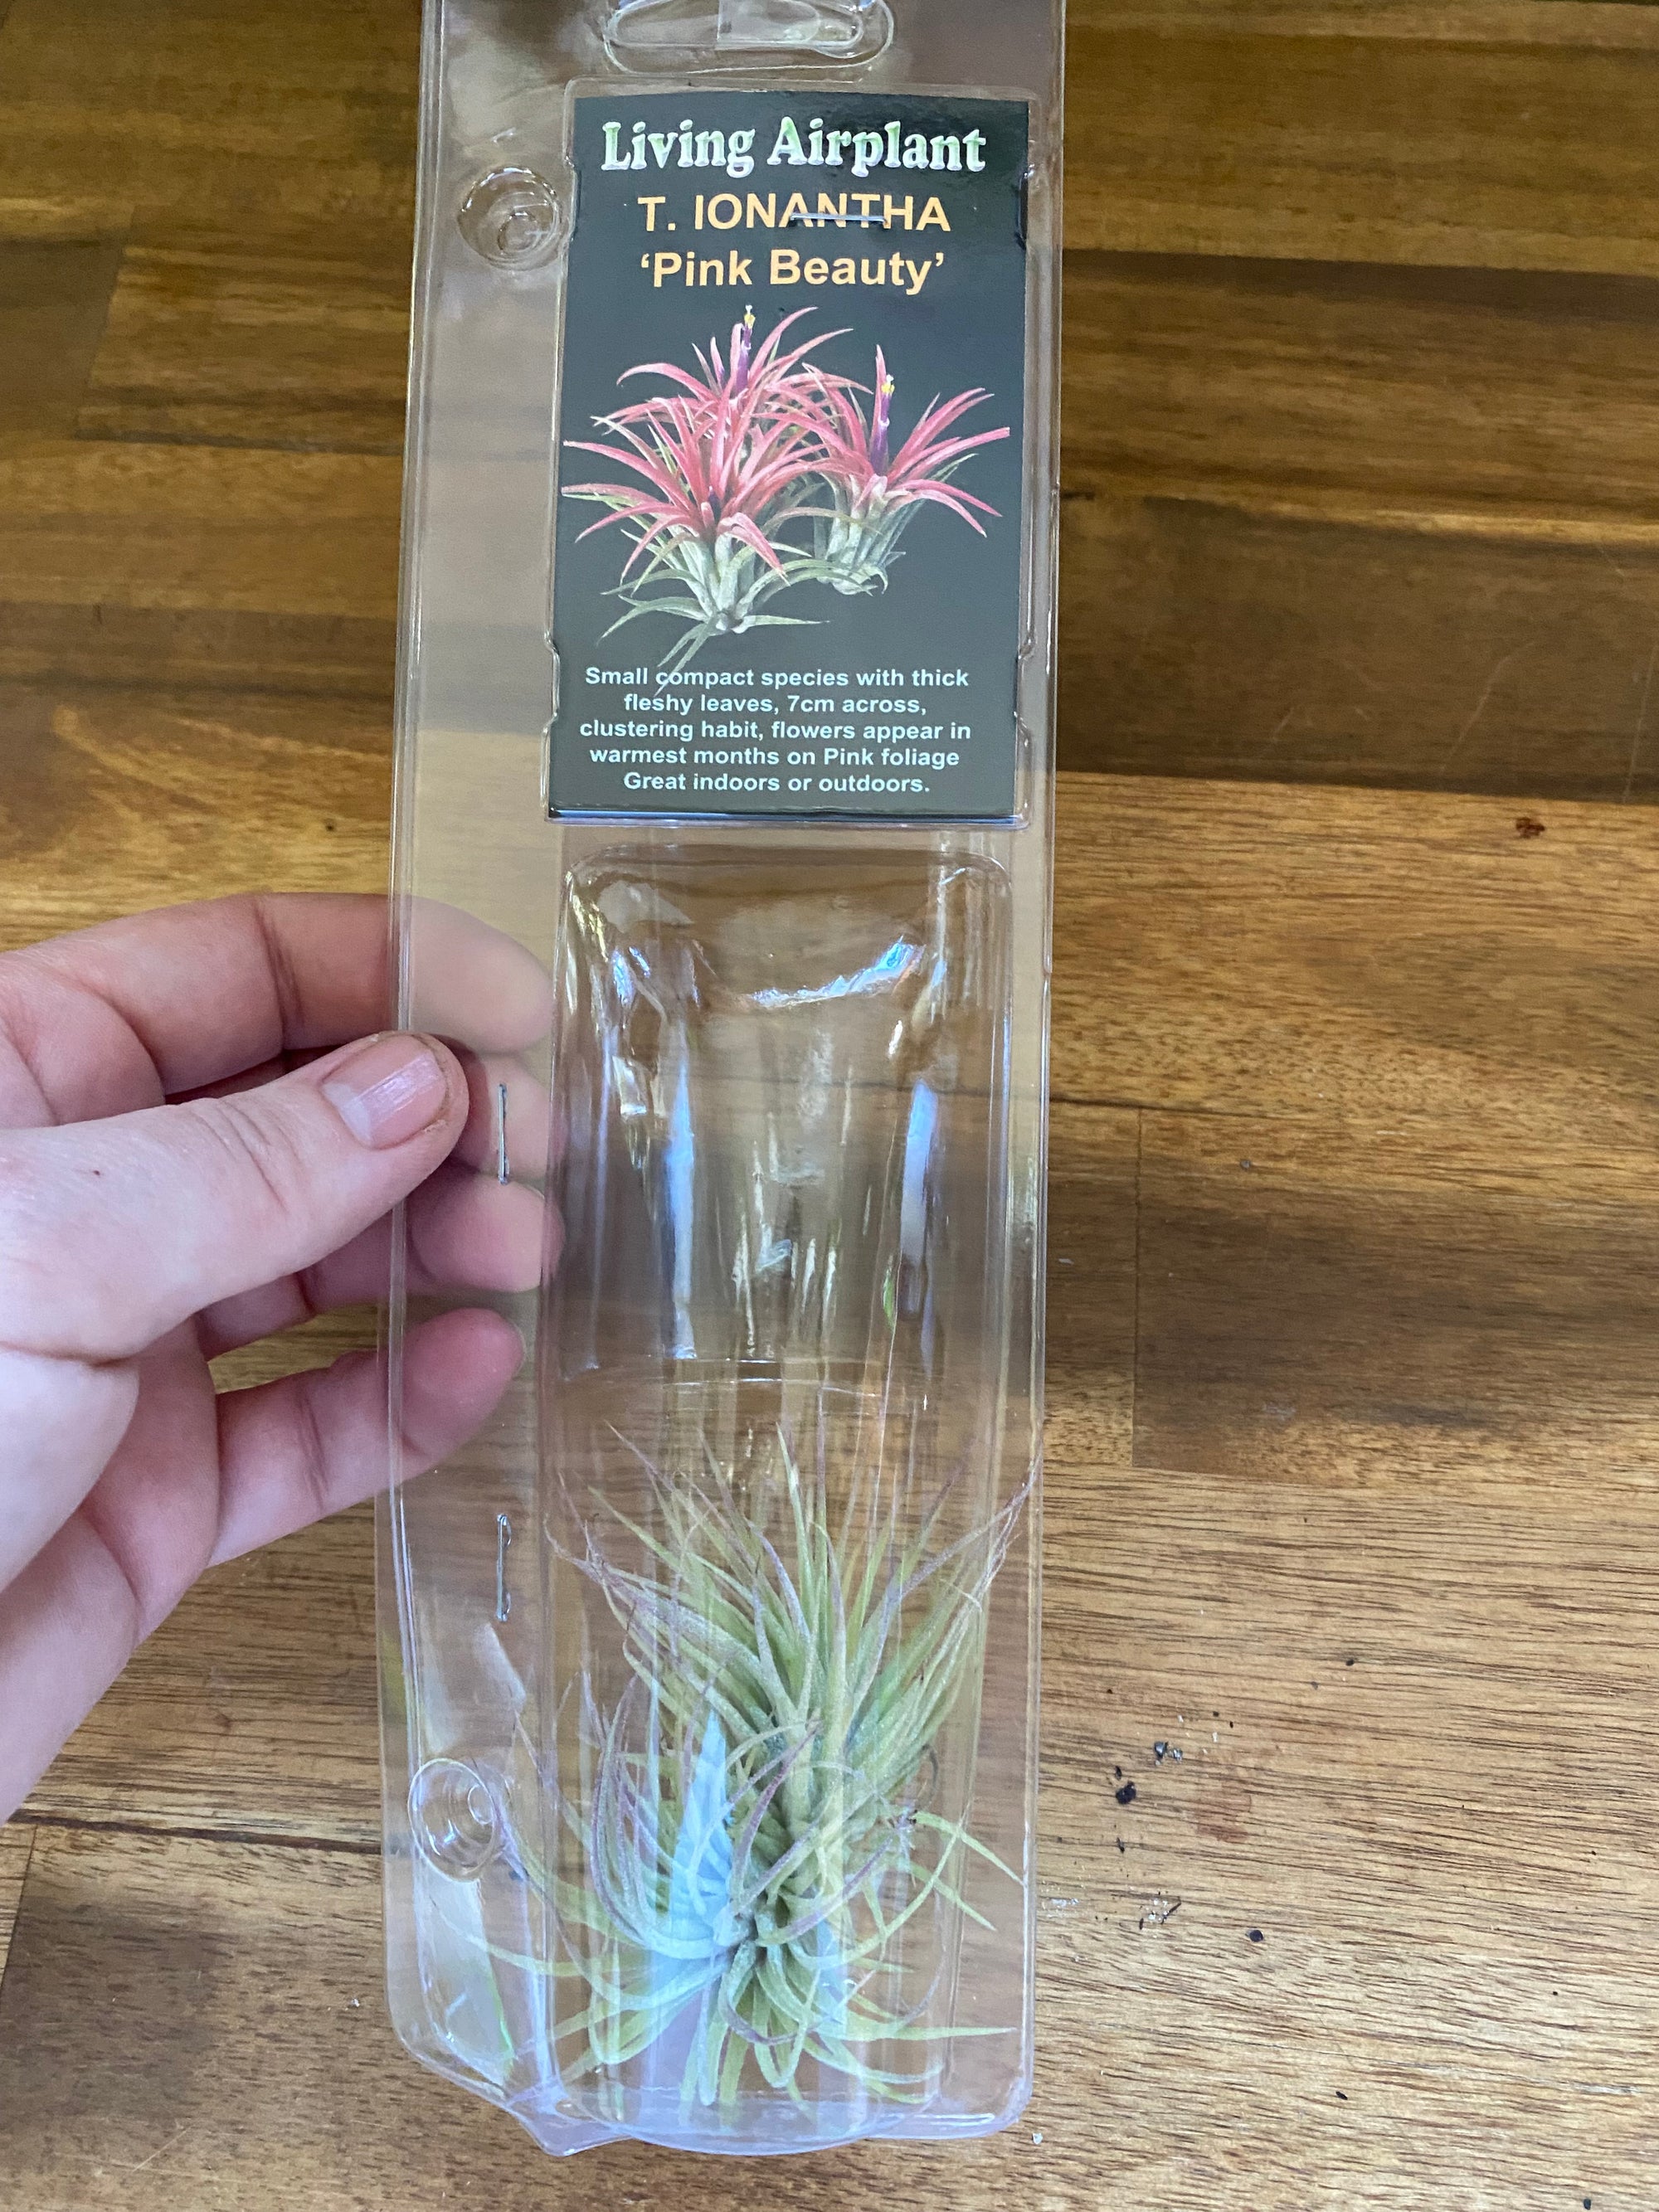 Living Airplant - T. IONANTHA 'Pink Beauty'